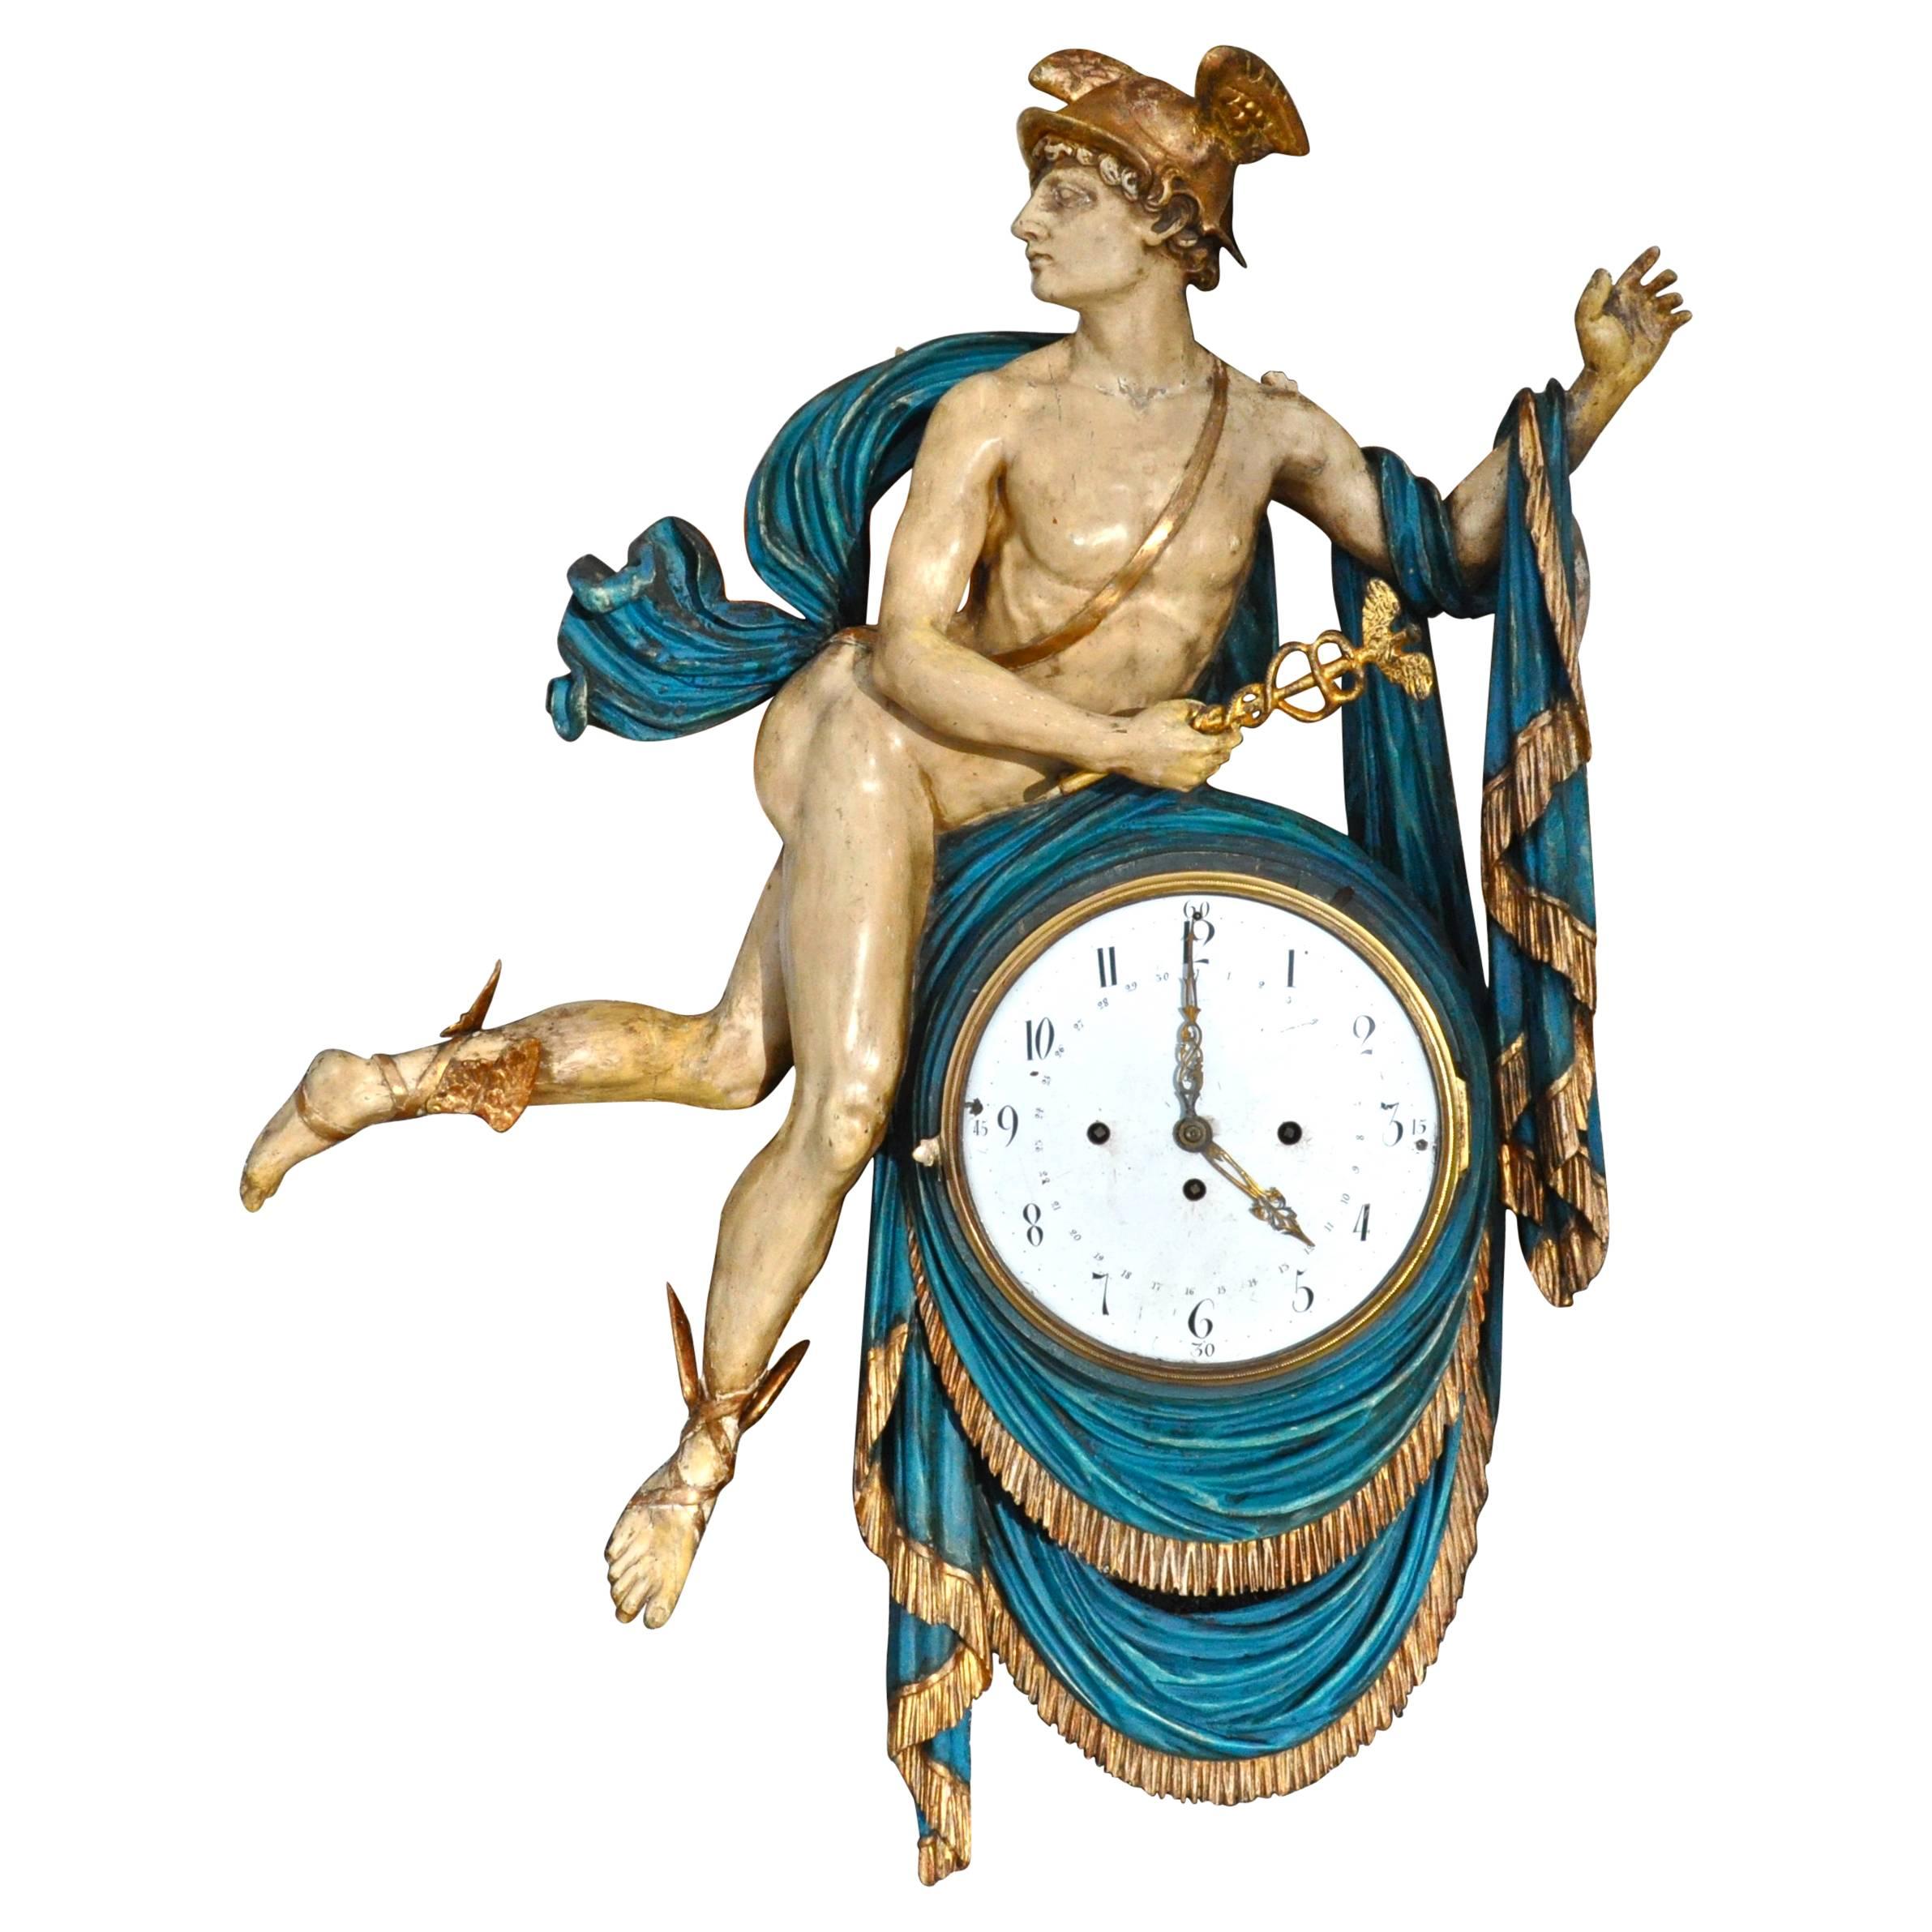 Period Early 19th Century Austrian Neoclassical Wall Clock